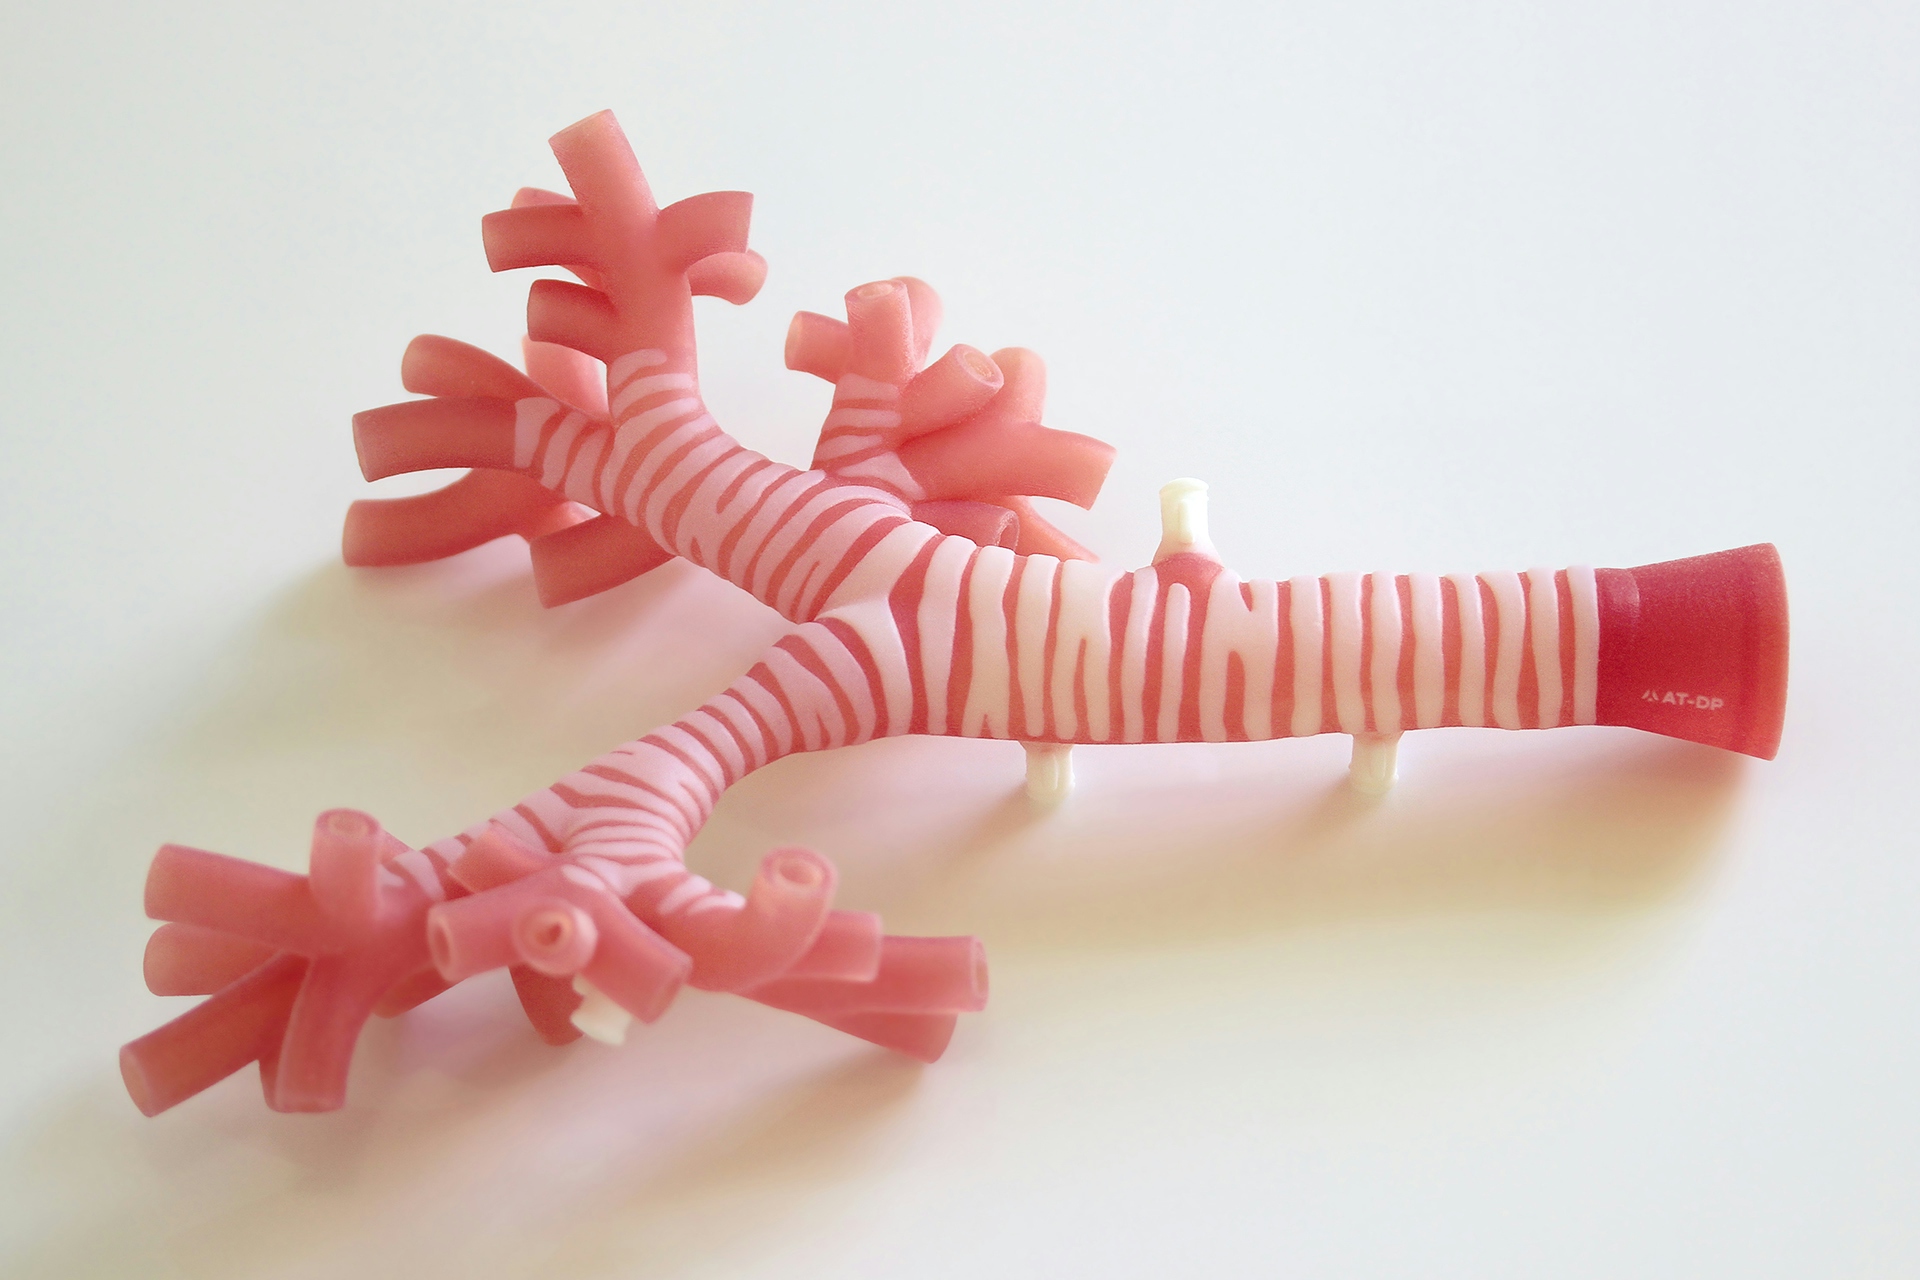 Side view of 3D printed adult trachea.